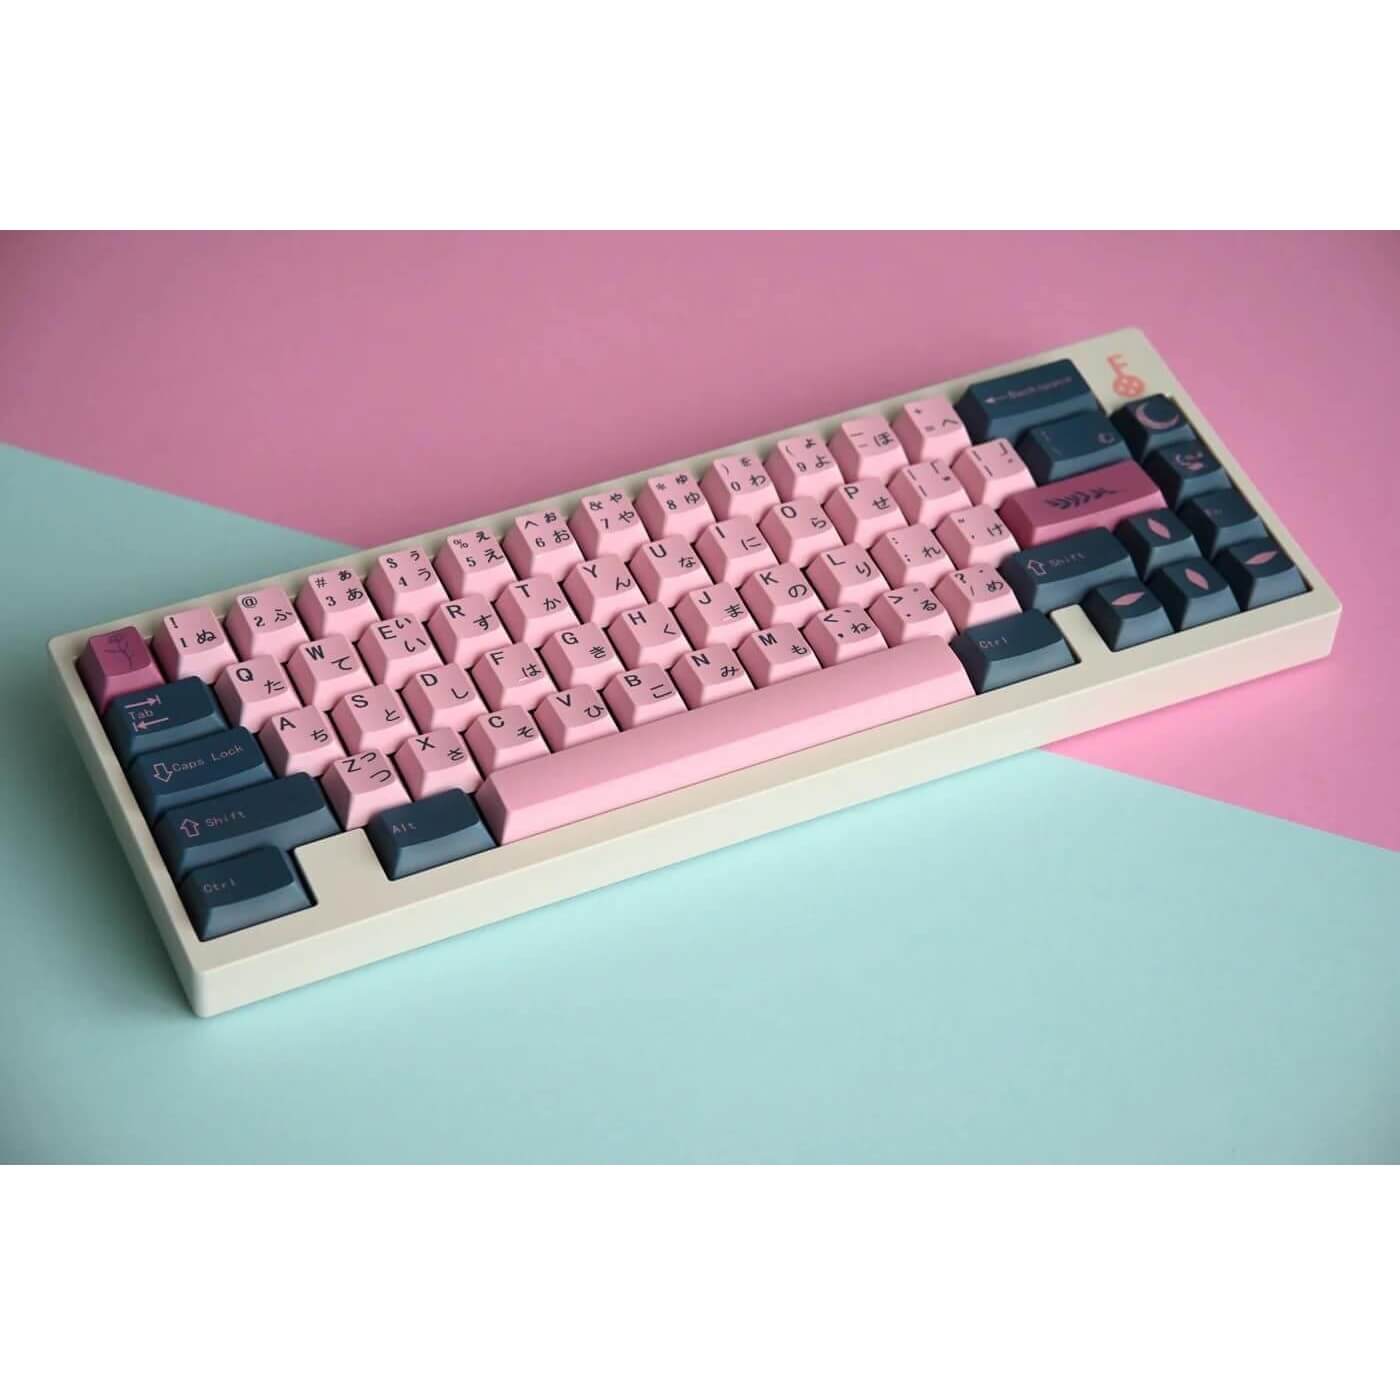 Flower and Moon Keycaps set TTD Product 3